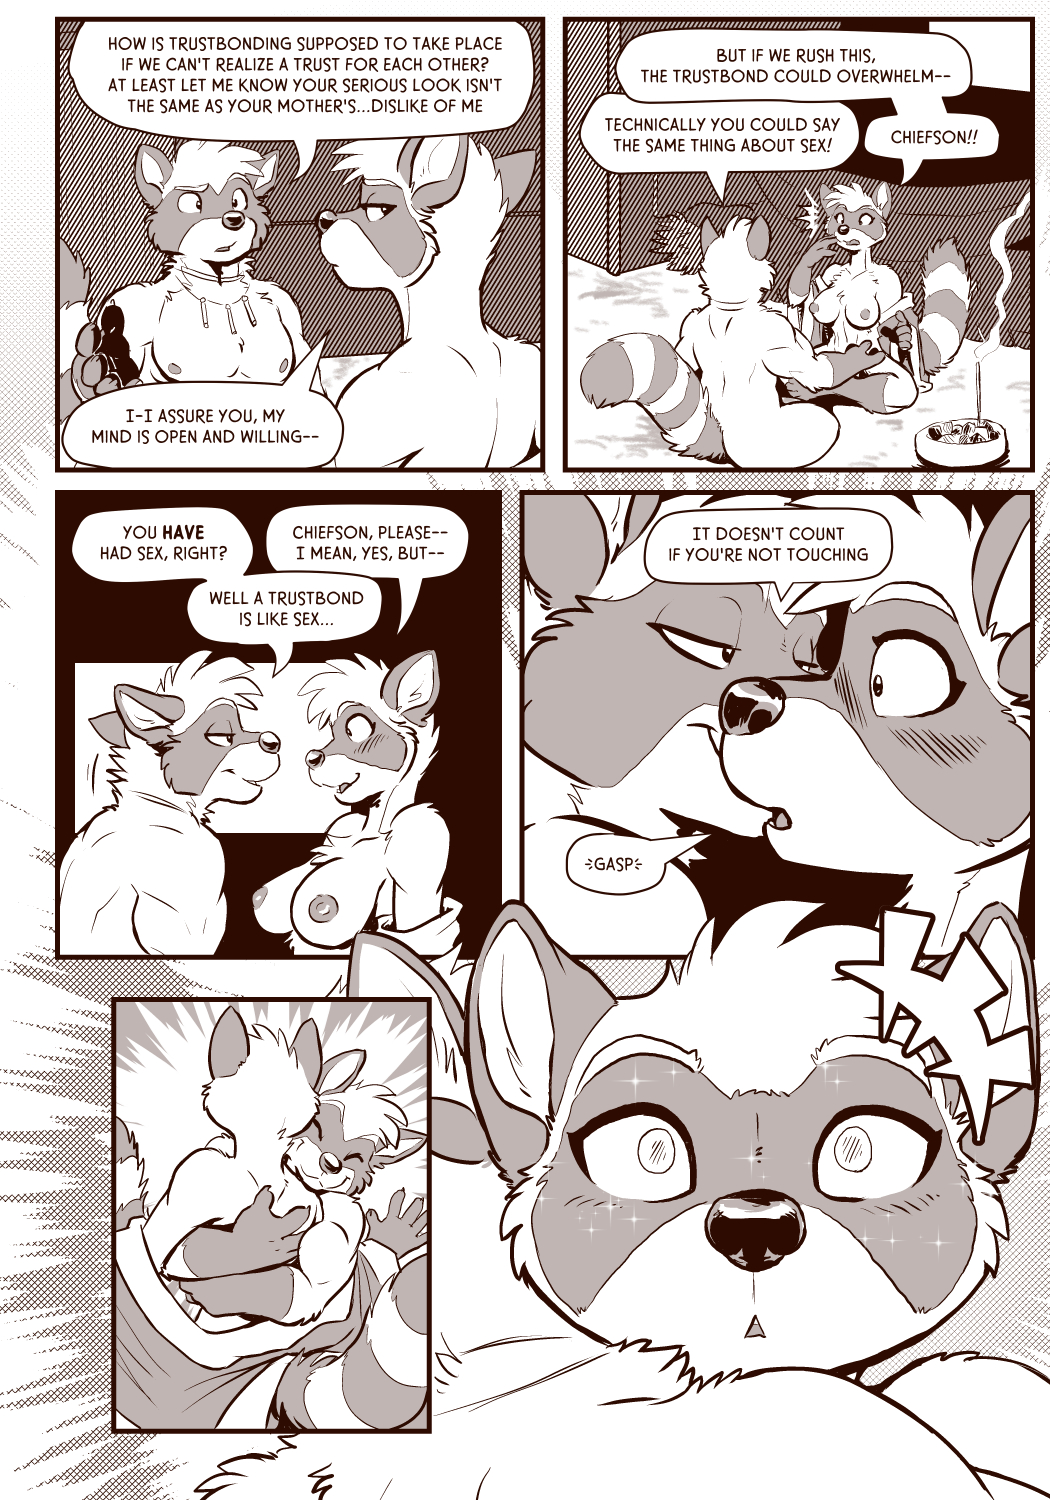 TotP Page 11 NSFW